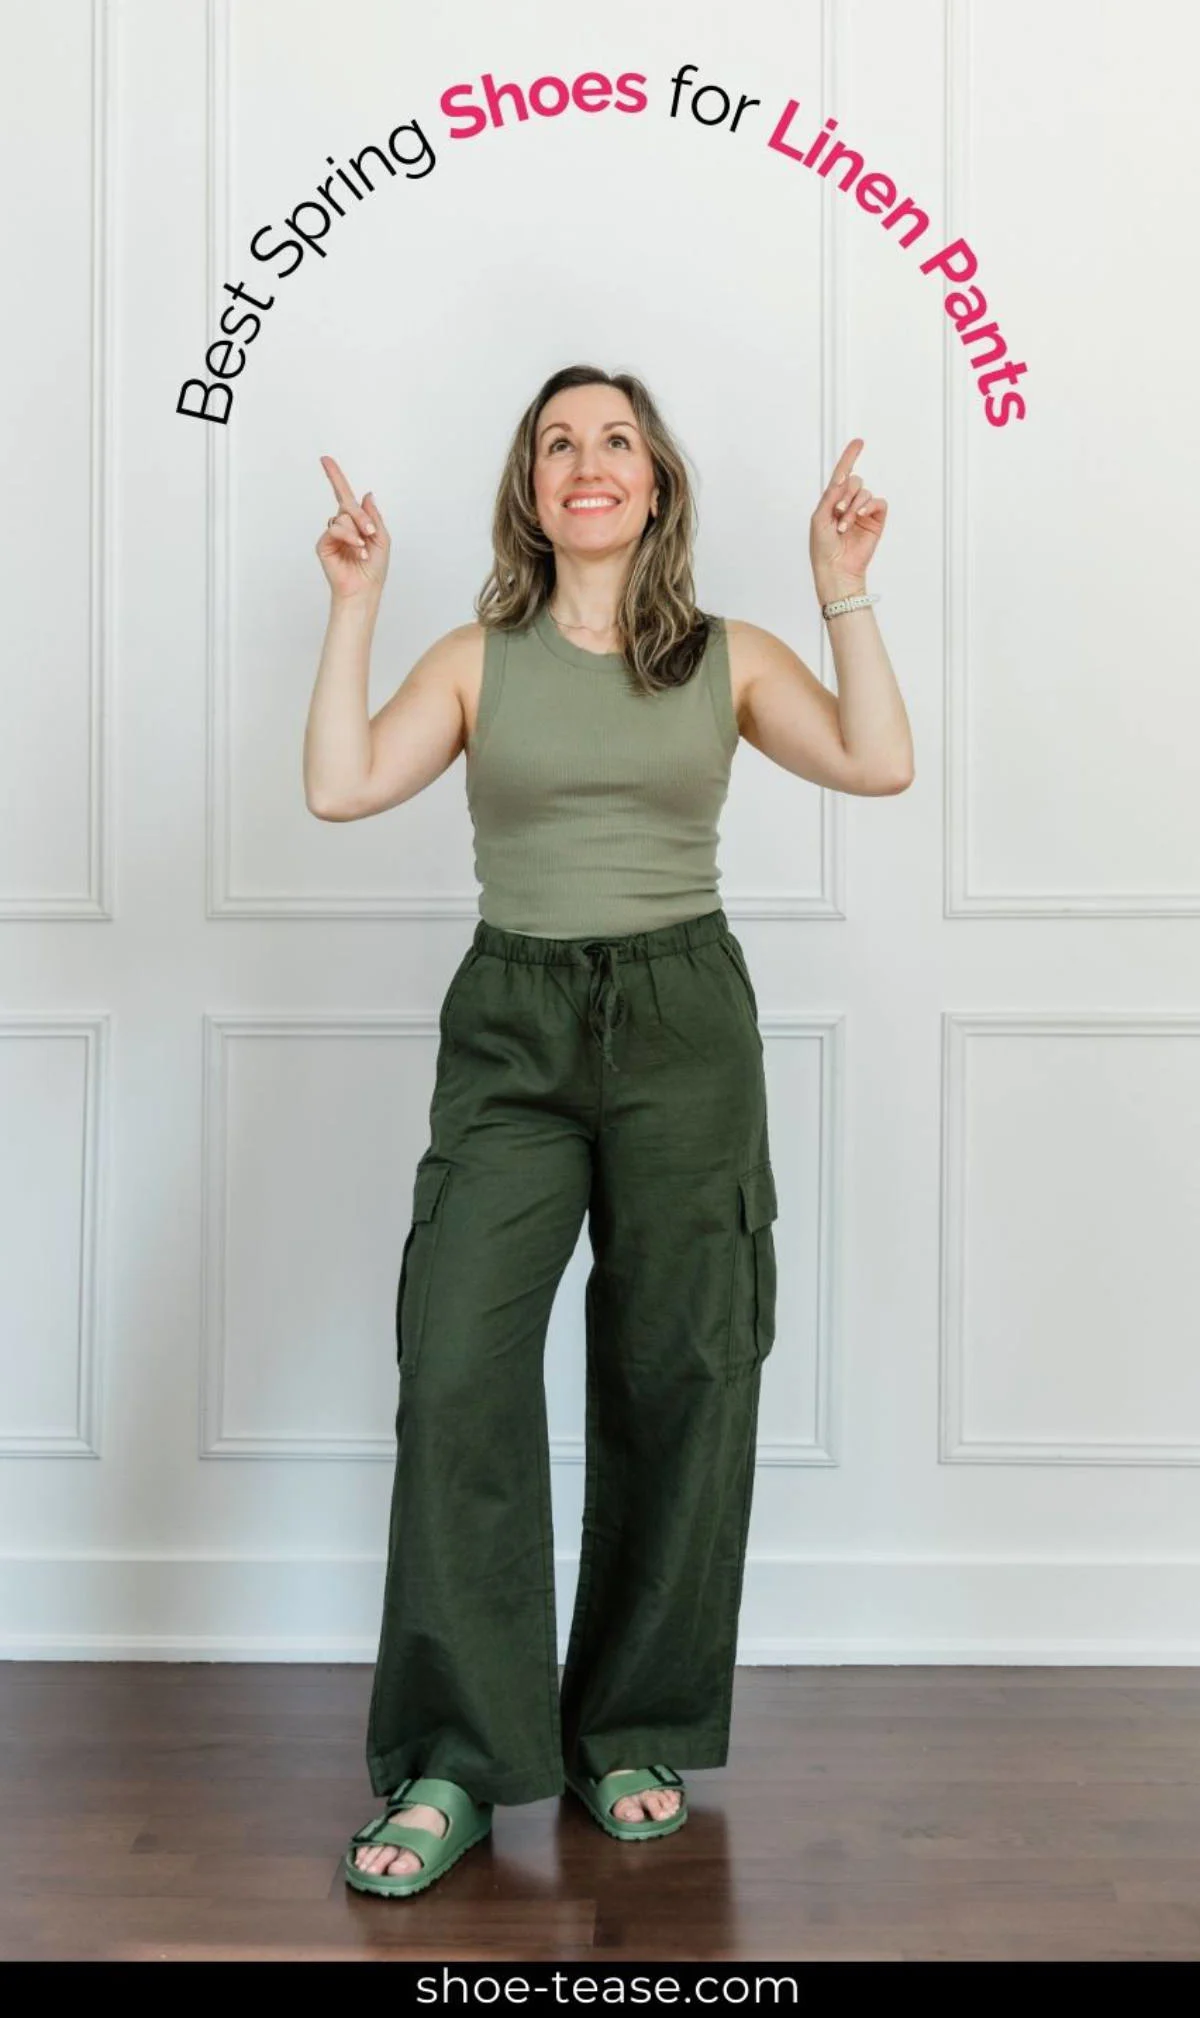 Woman wearing a light green tank top, olive green linen pants and green Birkenstock style sandals, pointing at words reading best spring shoes for linen pants.